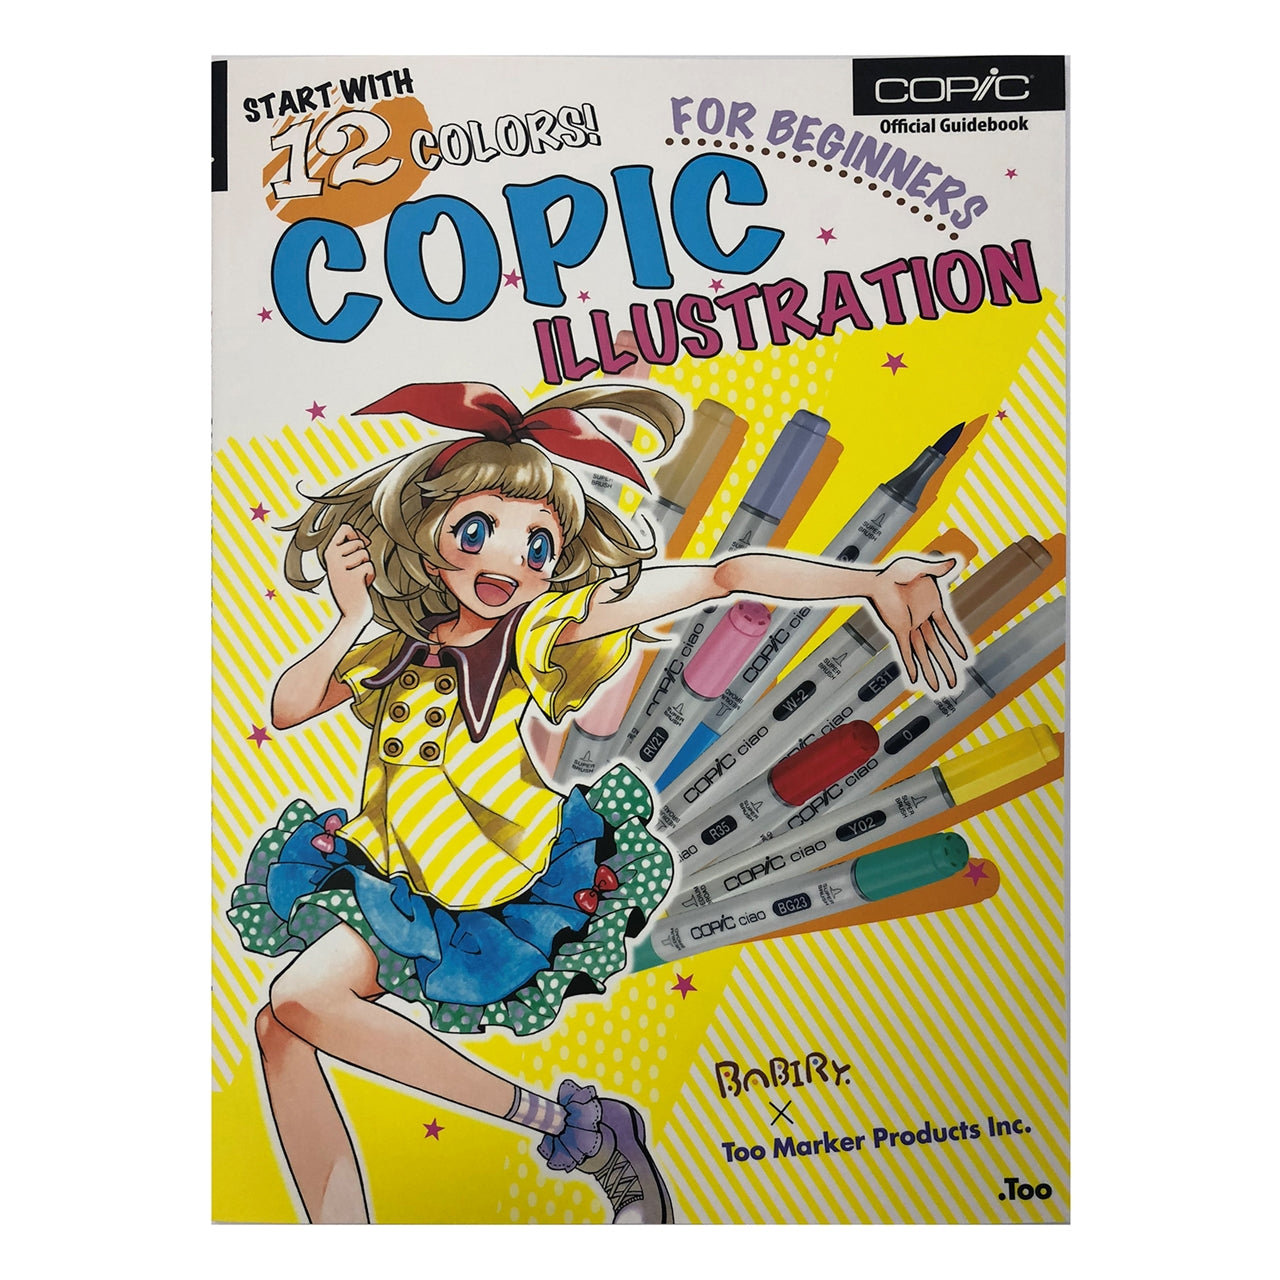 Copic Book - Copic Illustration for Beginners